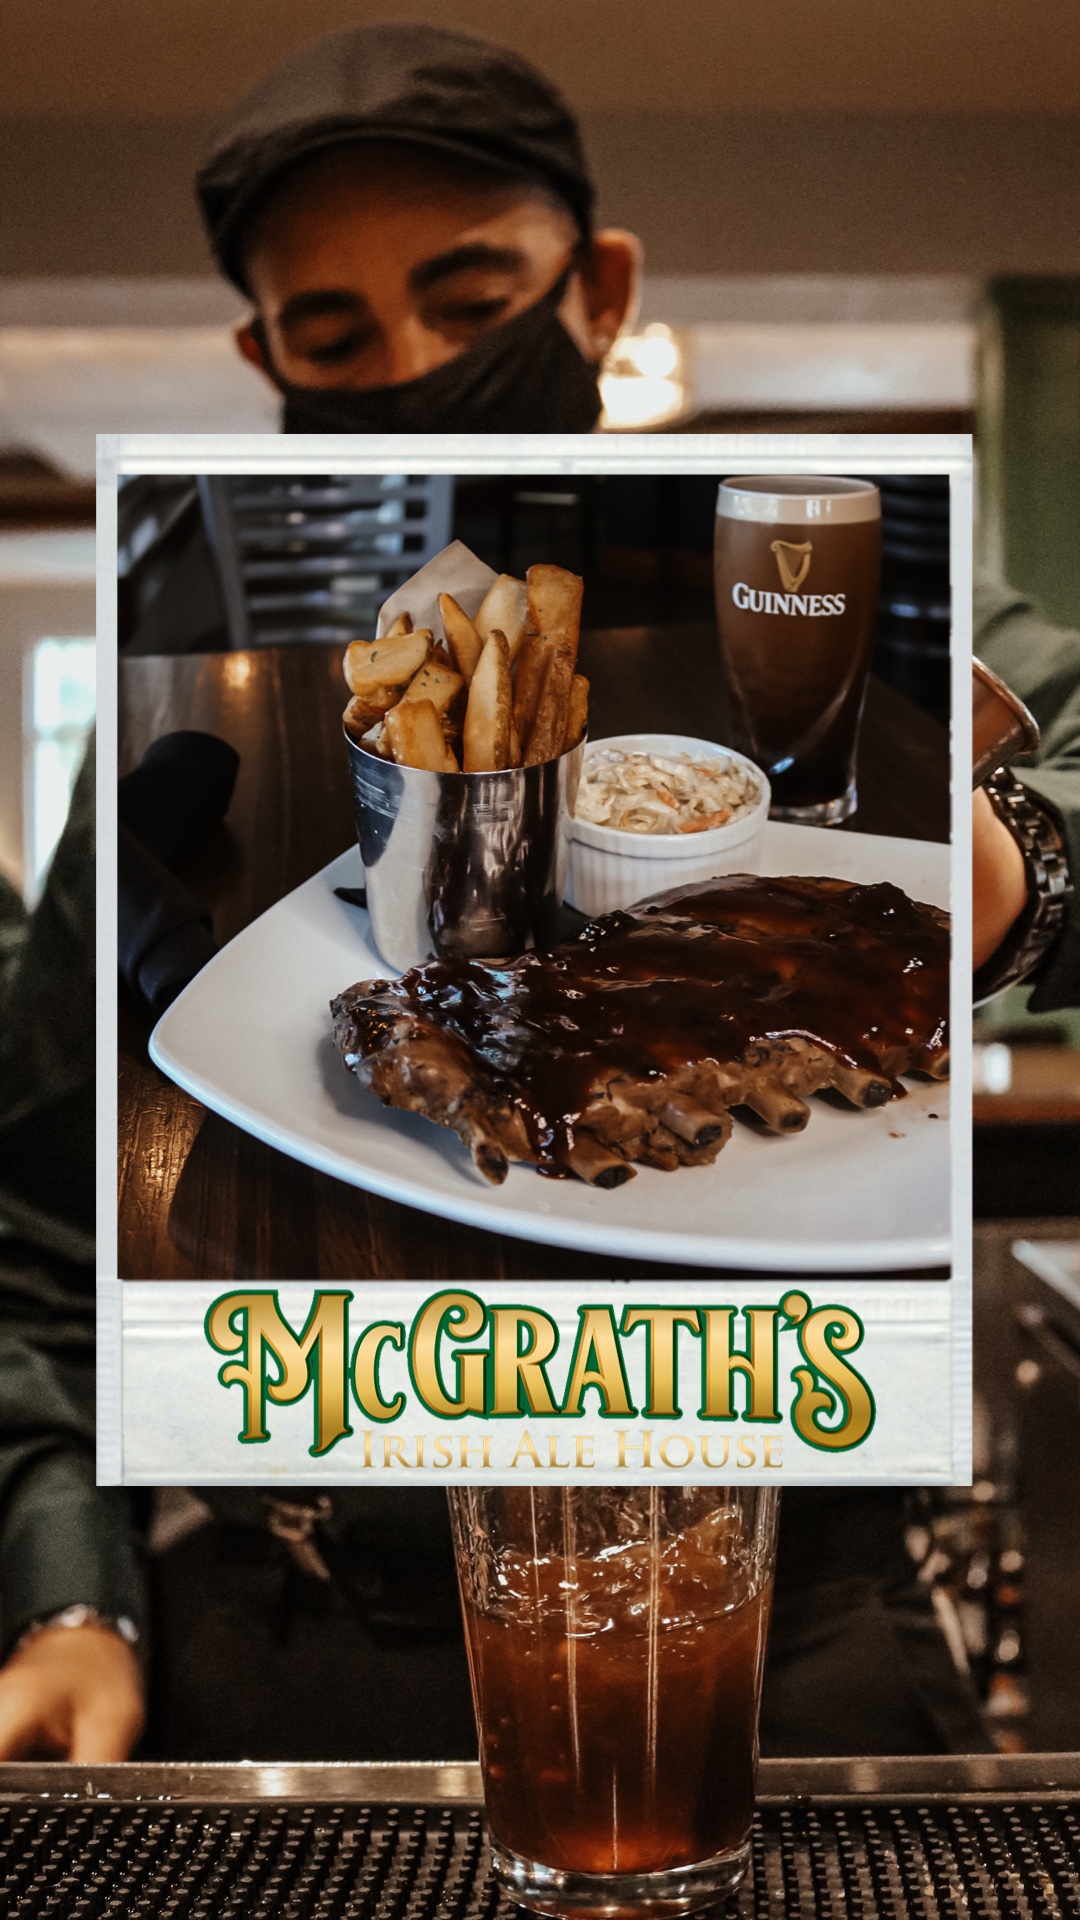 All You Can Eat Ribs at McGrath’s!